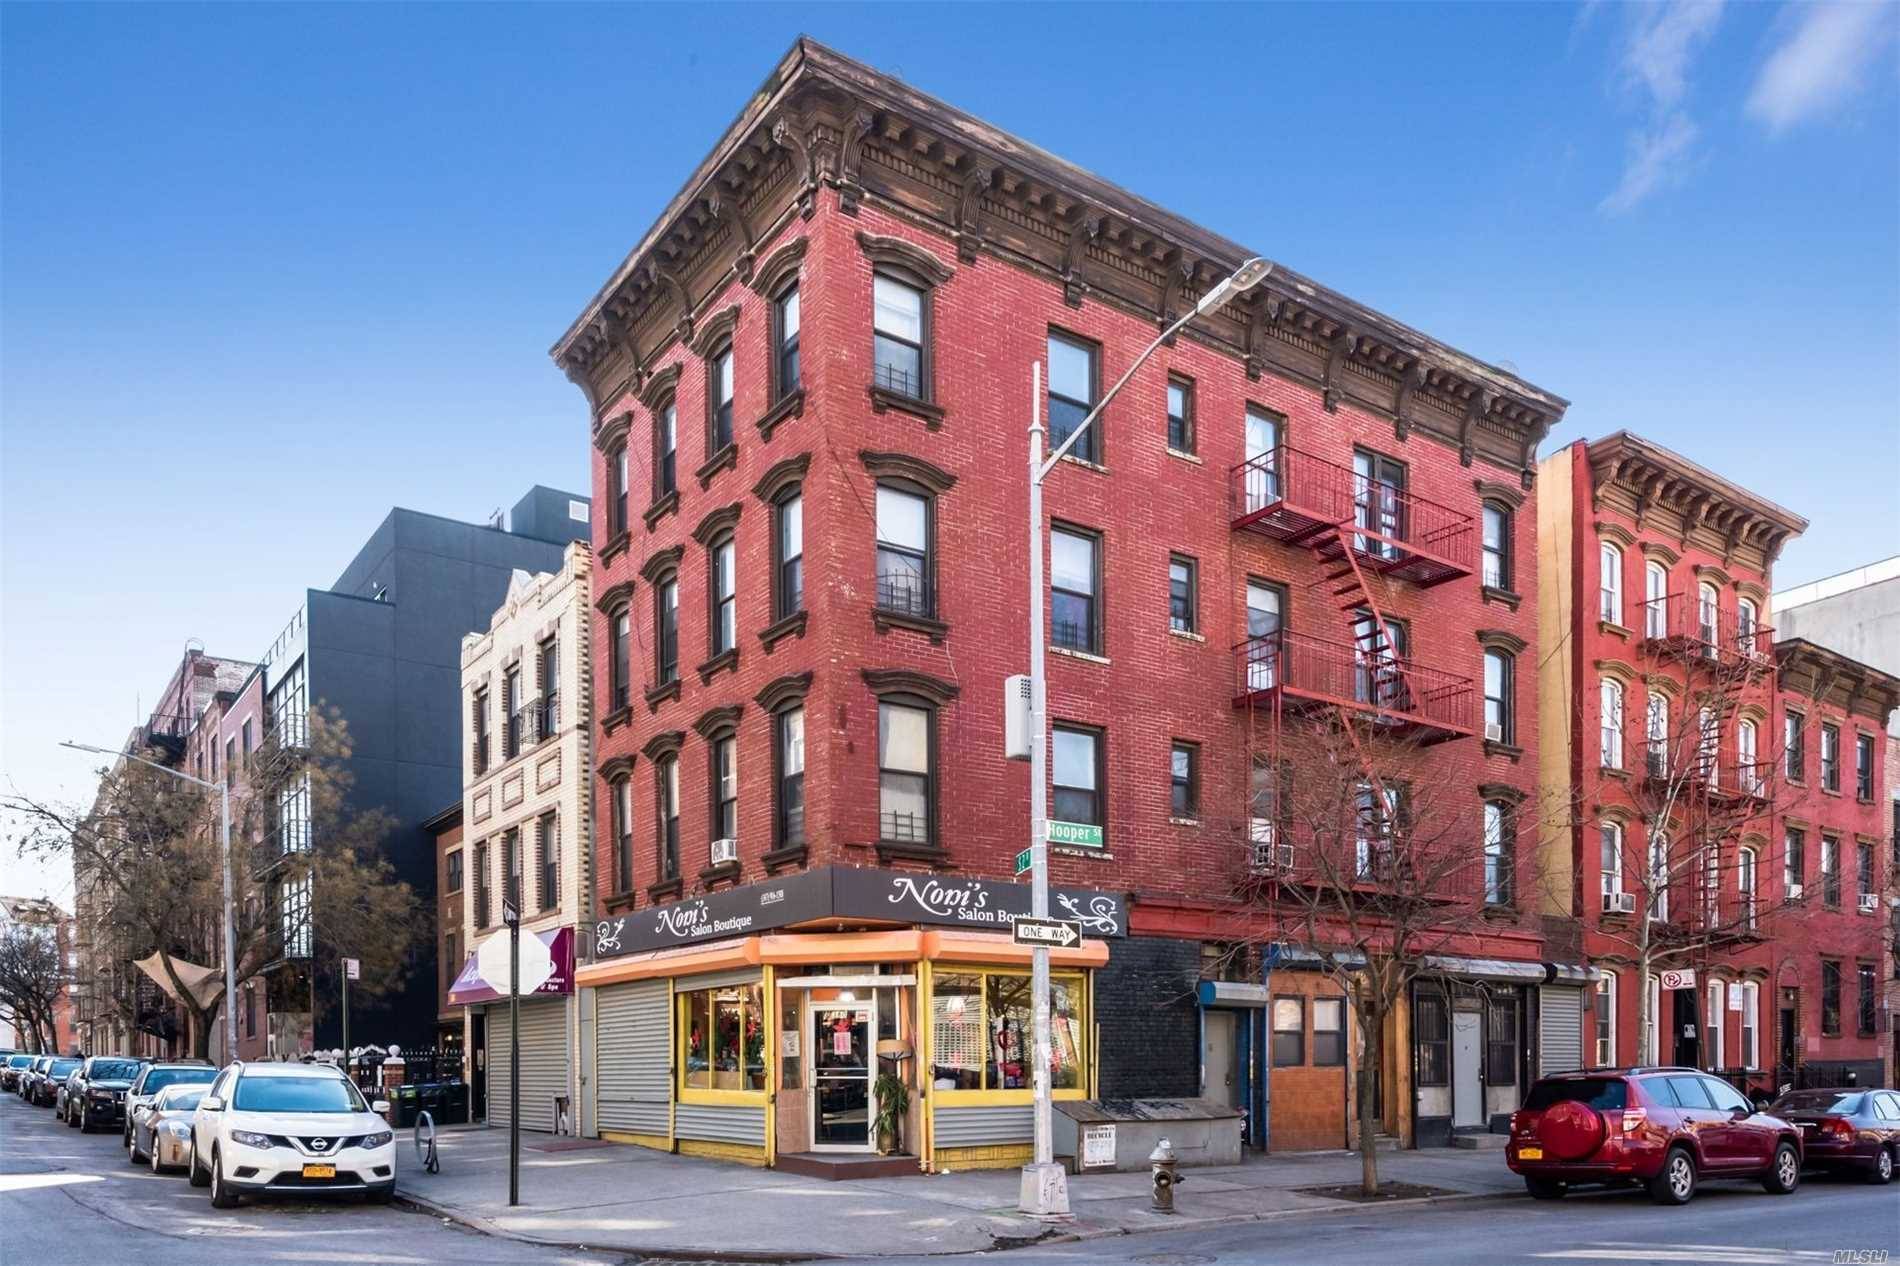 All Brick Corner Property, Located In East Williamsburg Section Of Brooklyn, 6 Units Plus An Established Salon, Situated Near Trendy Grand Street Retail And Nightlife.